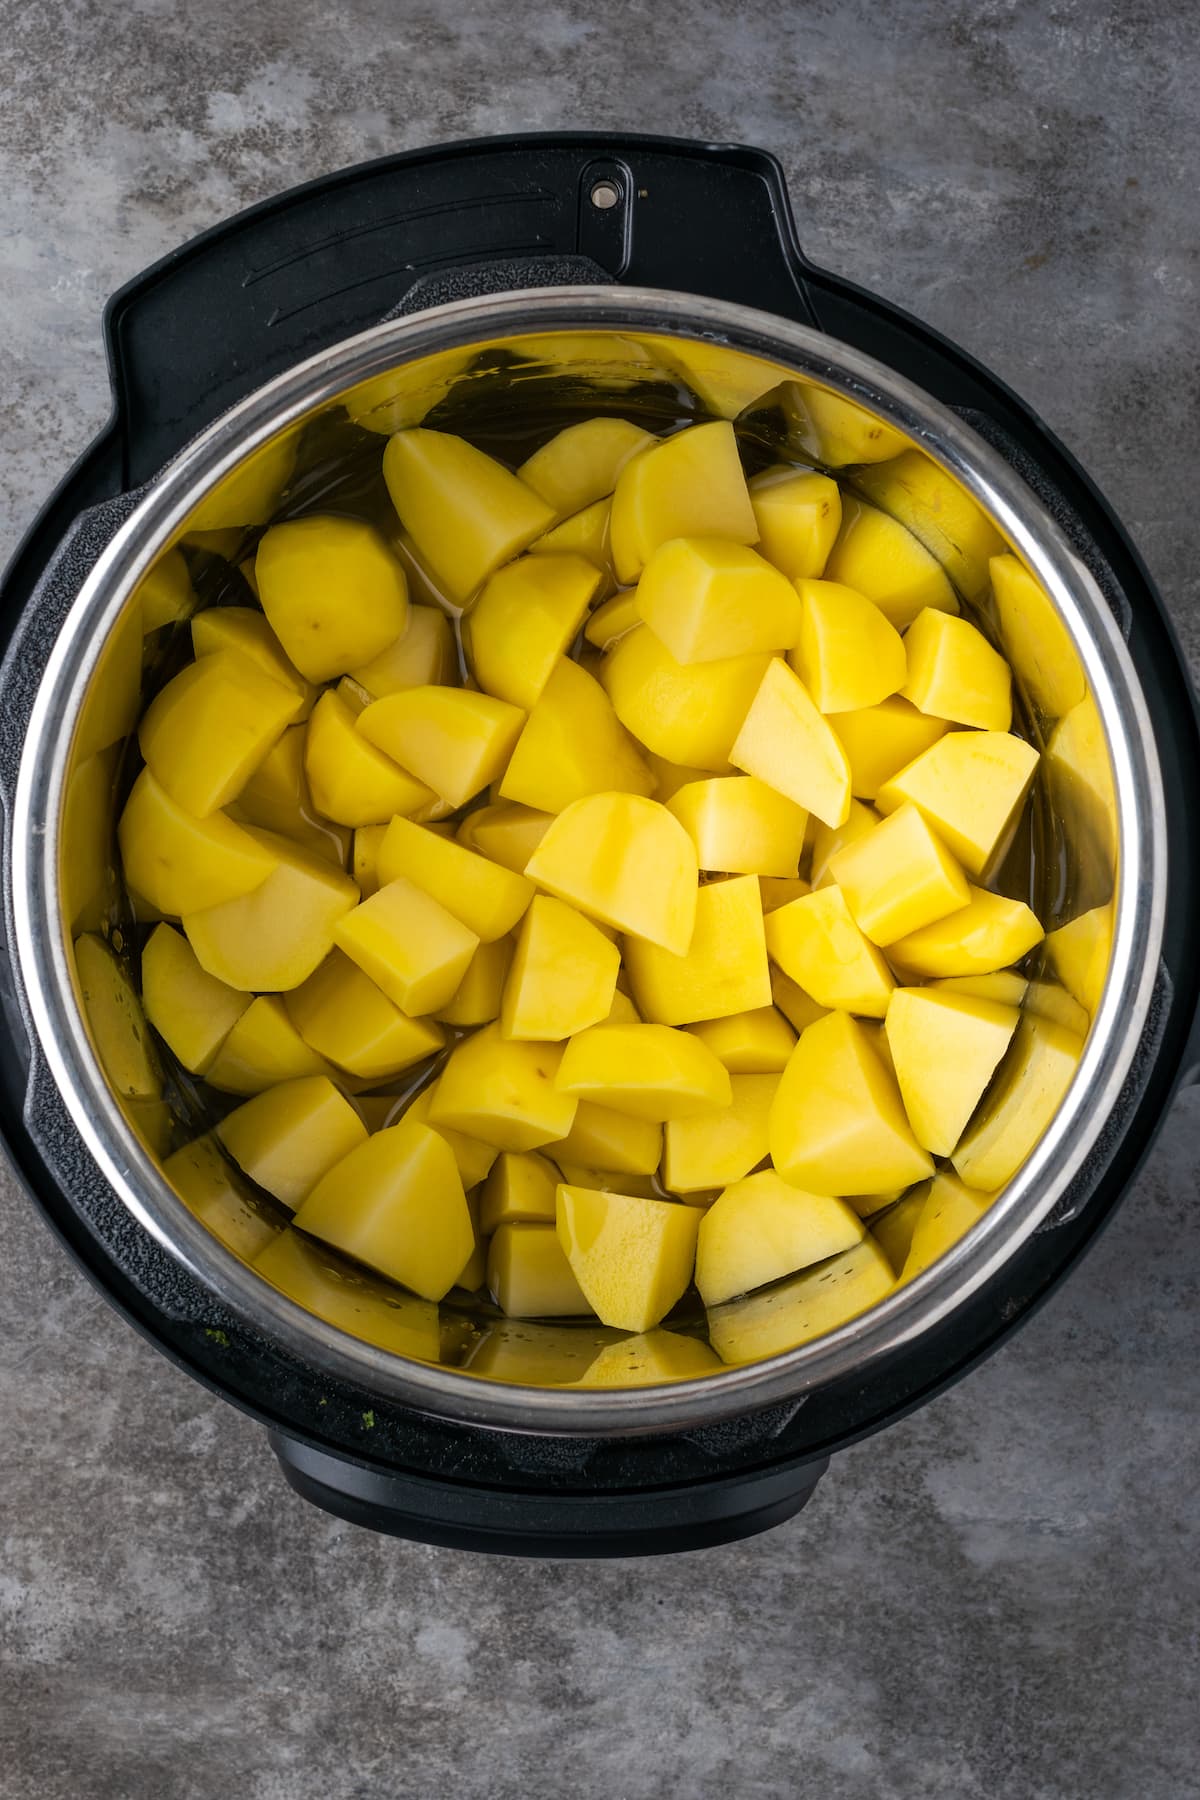 Chopped cooked potatoes inside an Instant Pot.